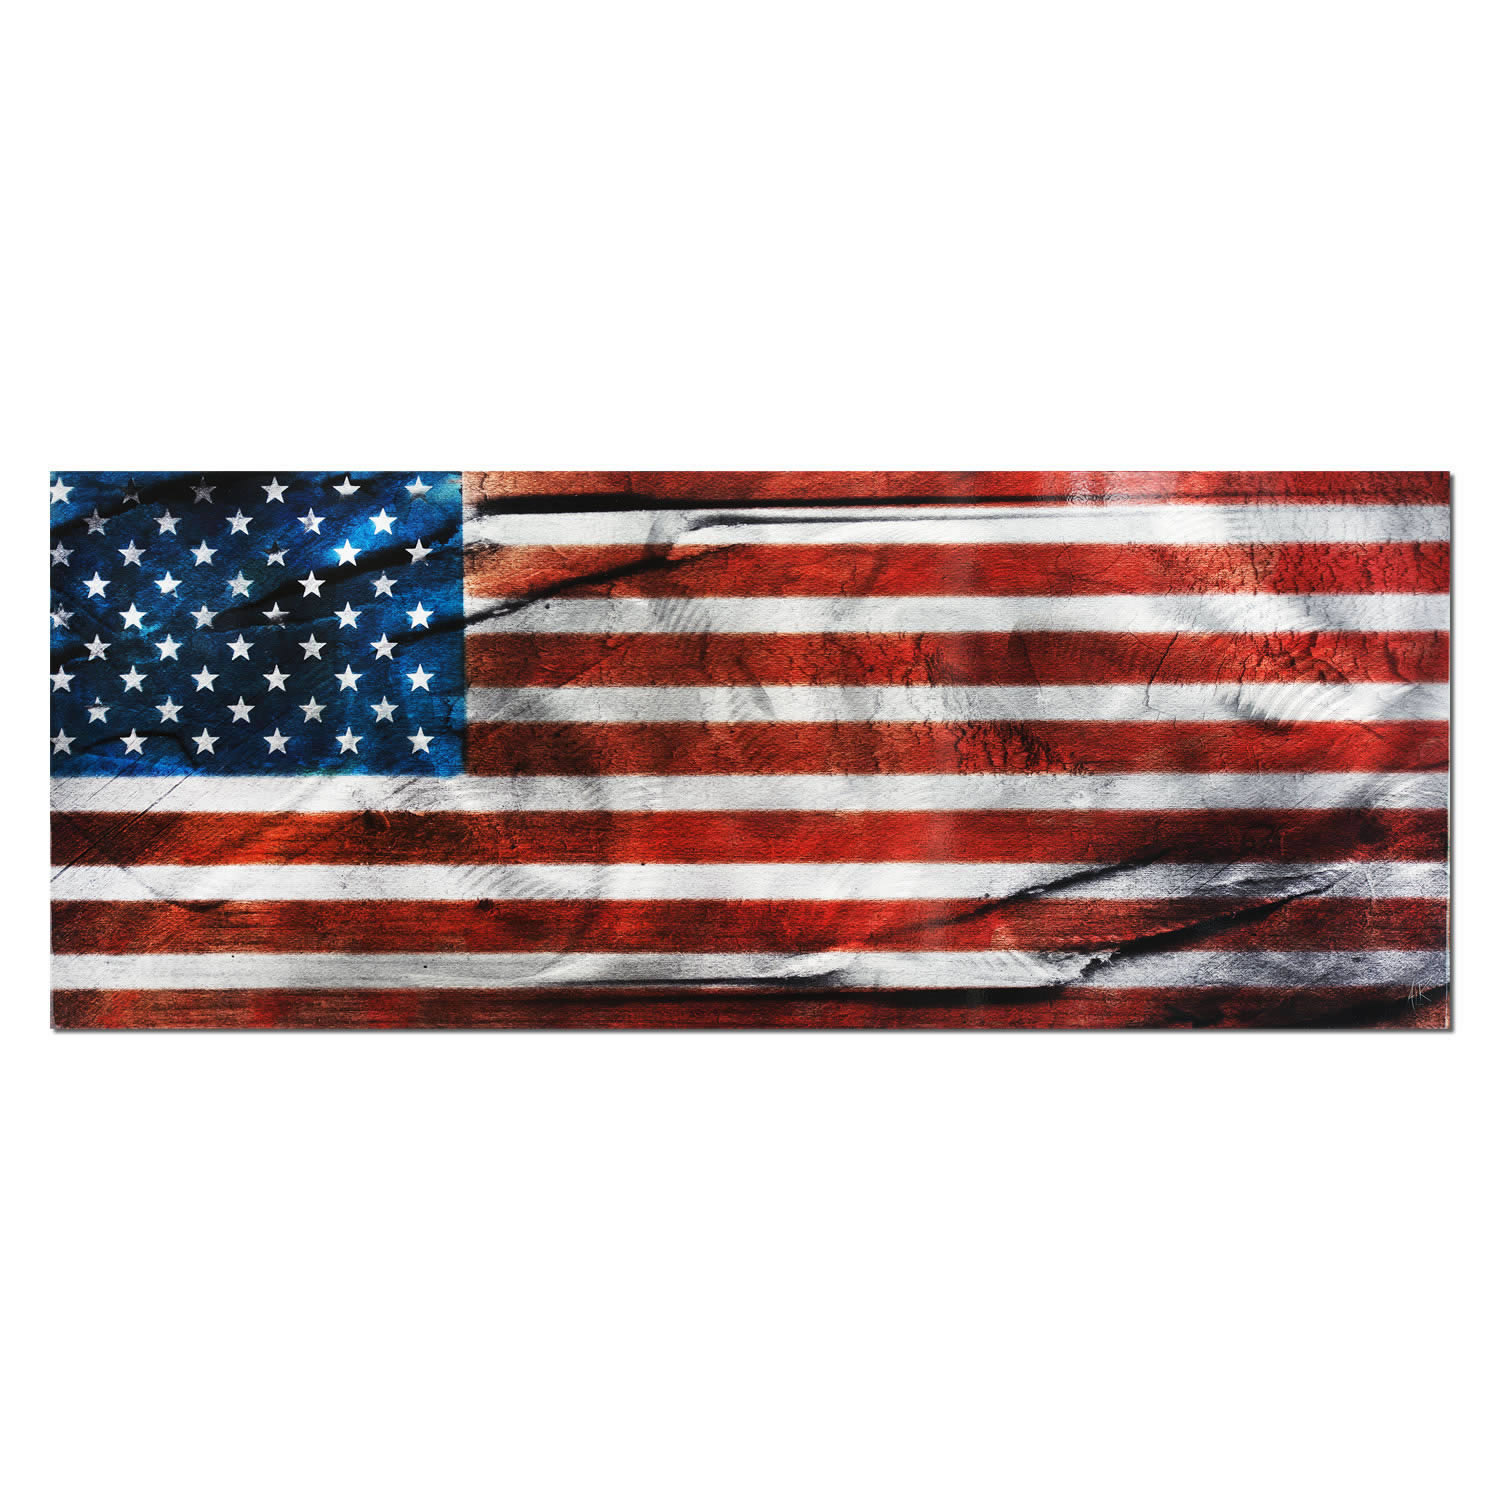 AMERICAN GLORY | Scratch & Dent Art on Clearance 